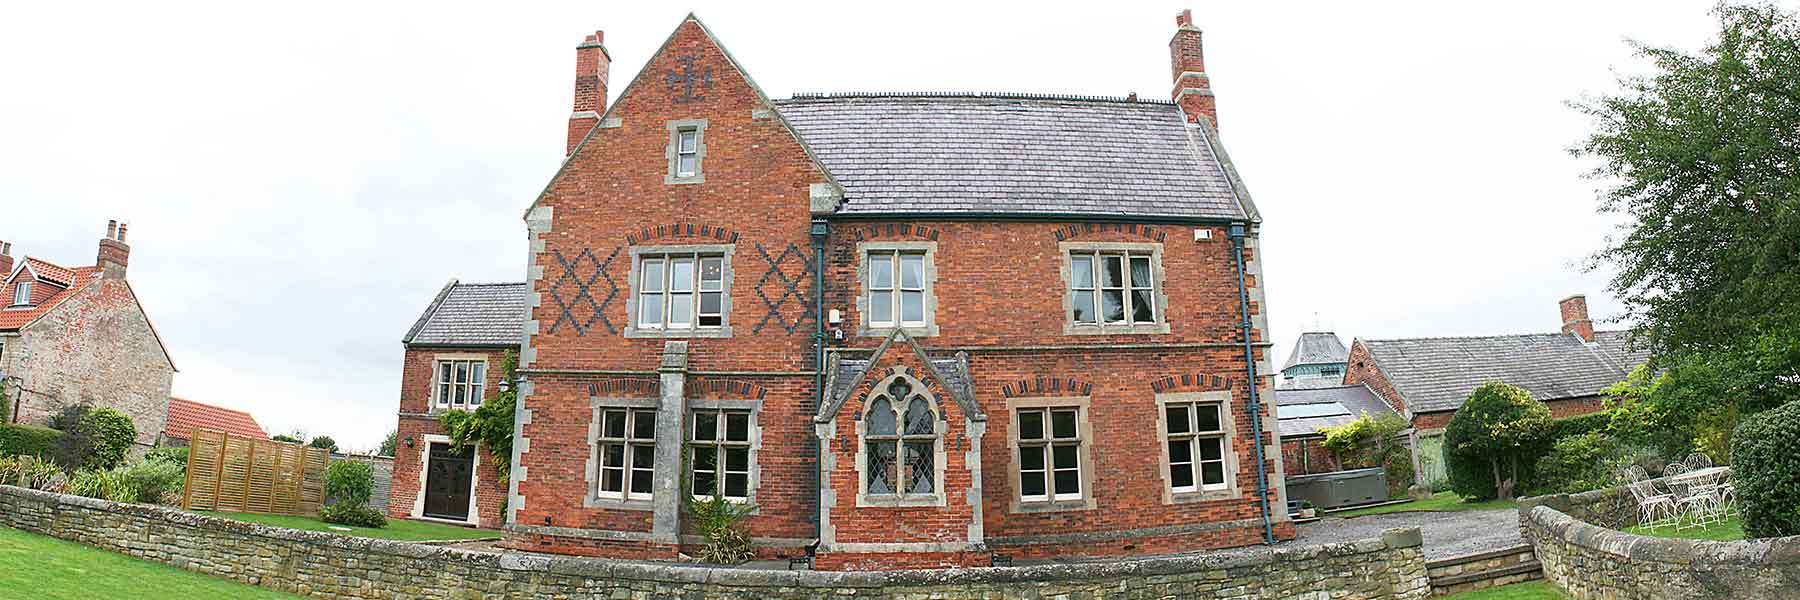 Front View of Manor Farm House